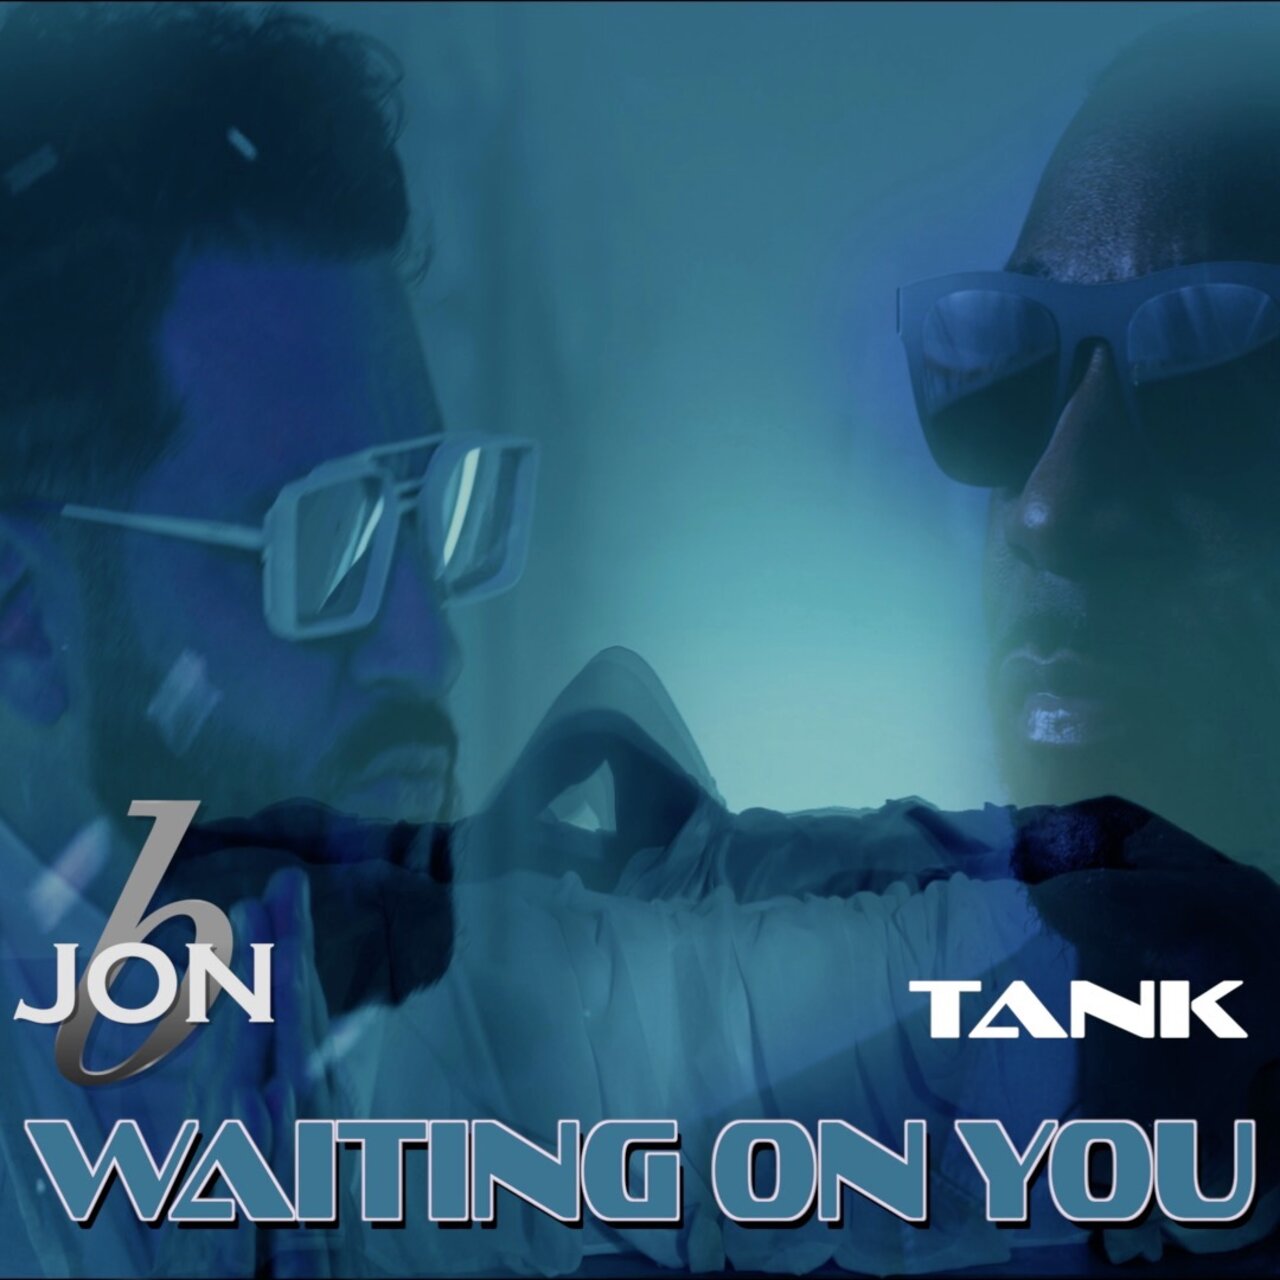 Jon B. ft. featuring Tank Waiting on You cover artwork